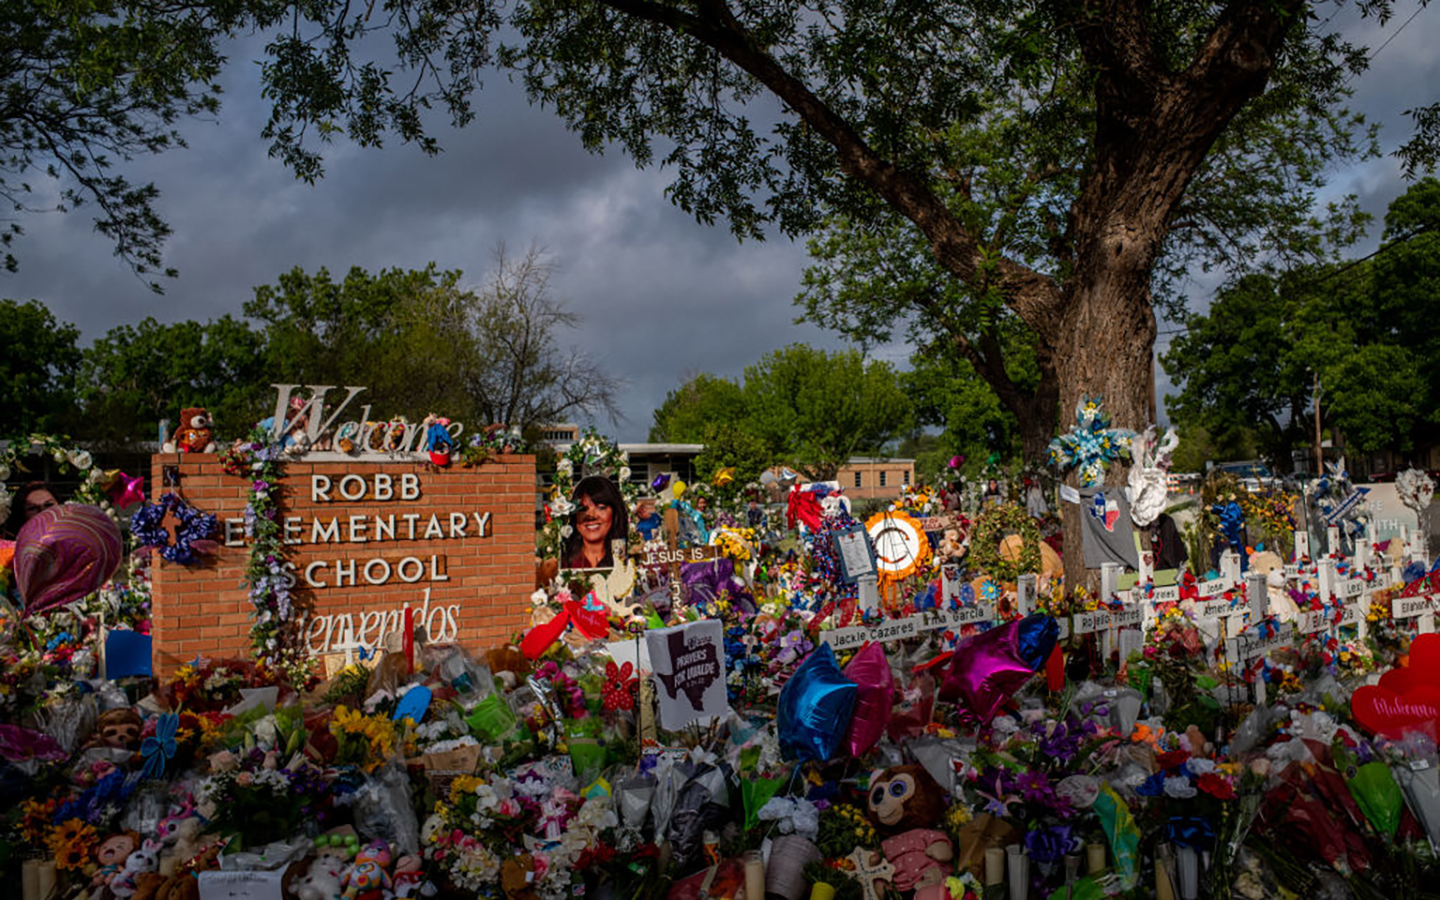 A memorial dedicated to the 19 children and two adults killed on May 24th during the mass shooting at Robb Elementary School is seen on June 01, 2022 in Uvalde, Texas